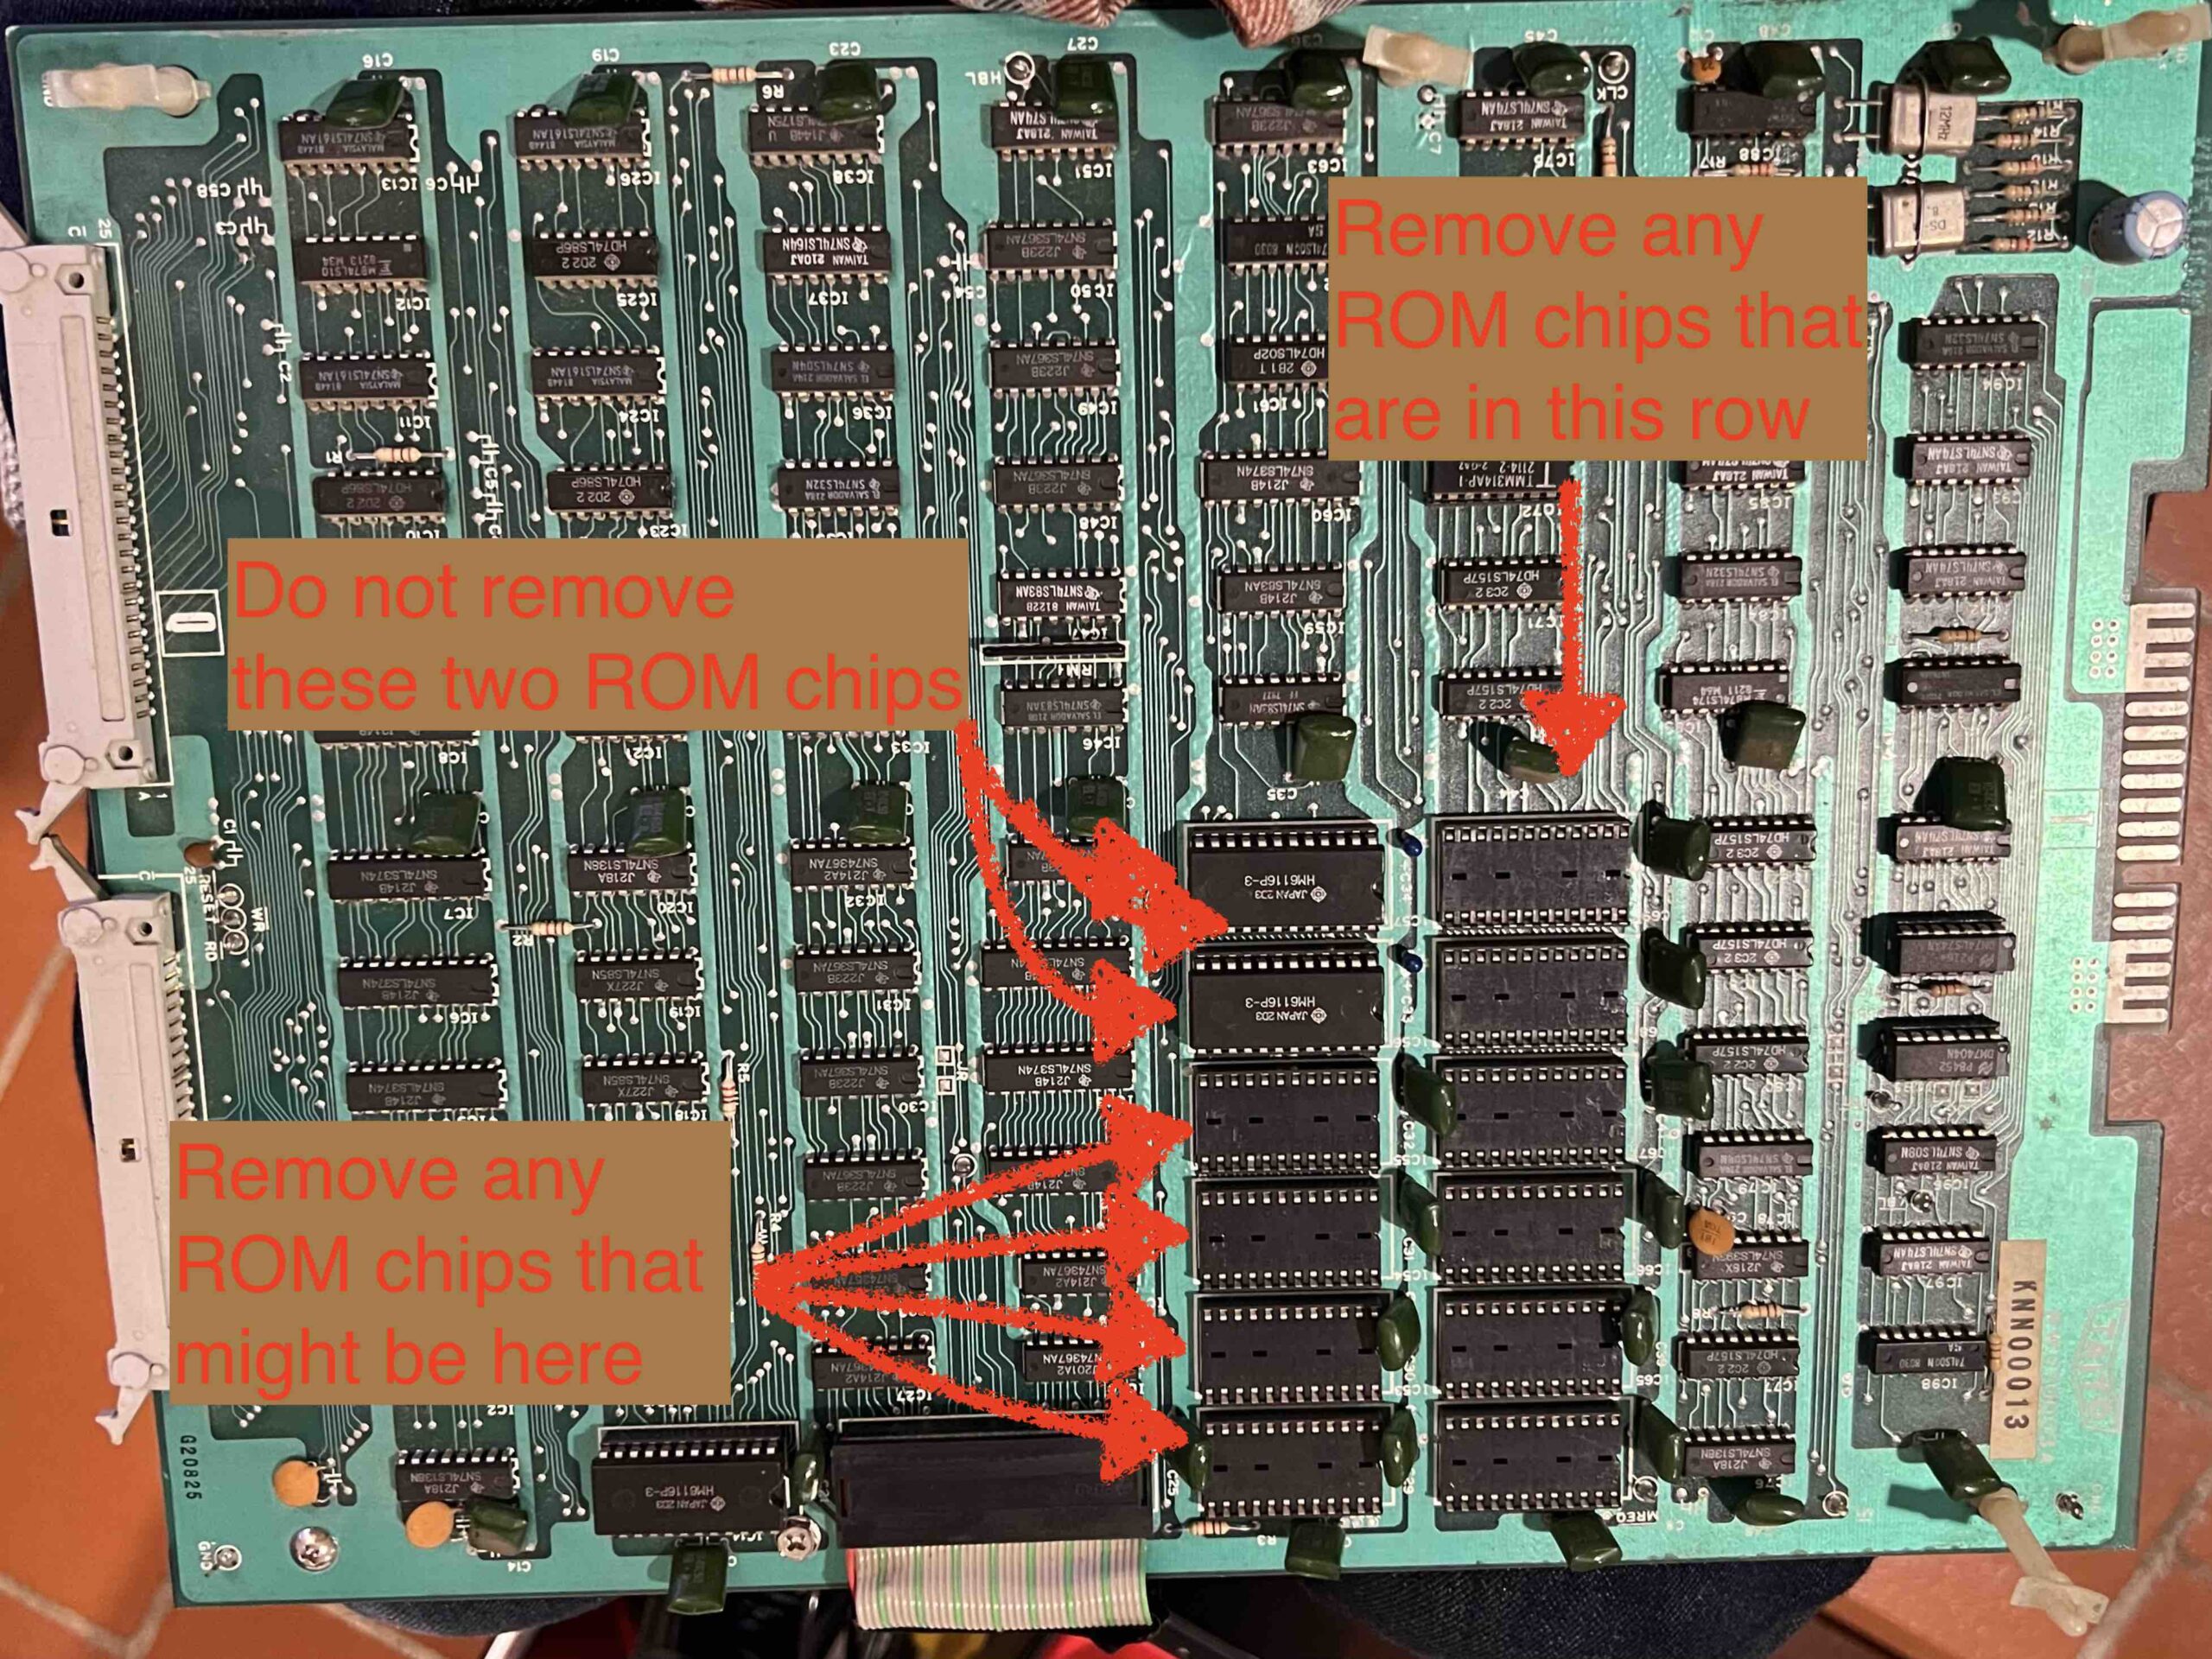 Elevator Action CPU Main board with instructions on which ROMs to remove